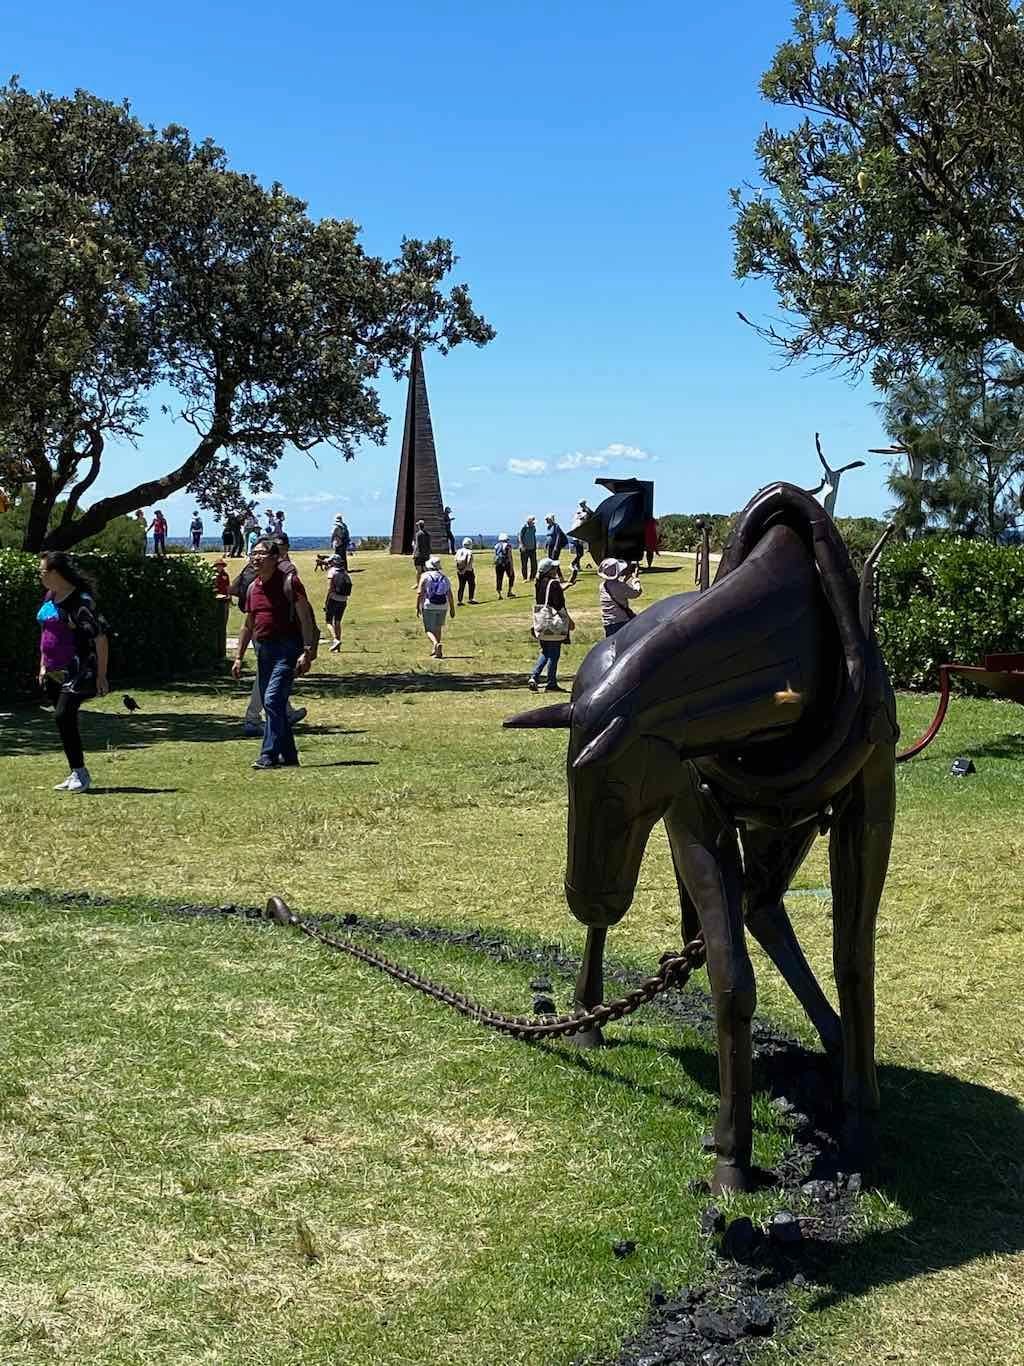 2022 Public Day Tour Sculptures by The Sea Image -6361cfdb16fc0